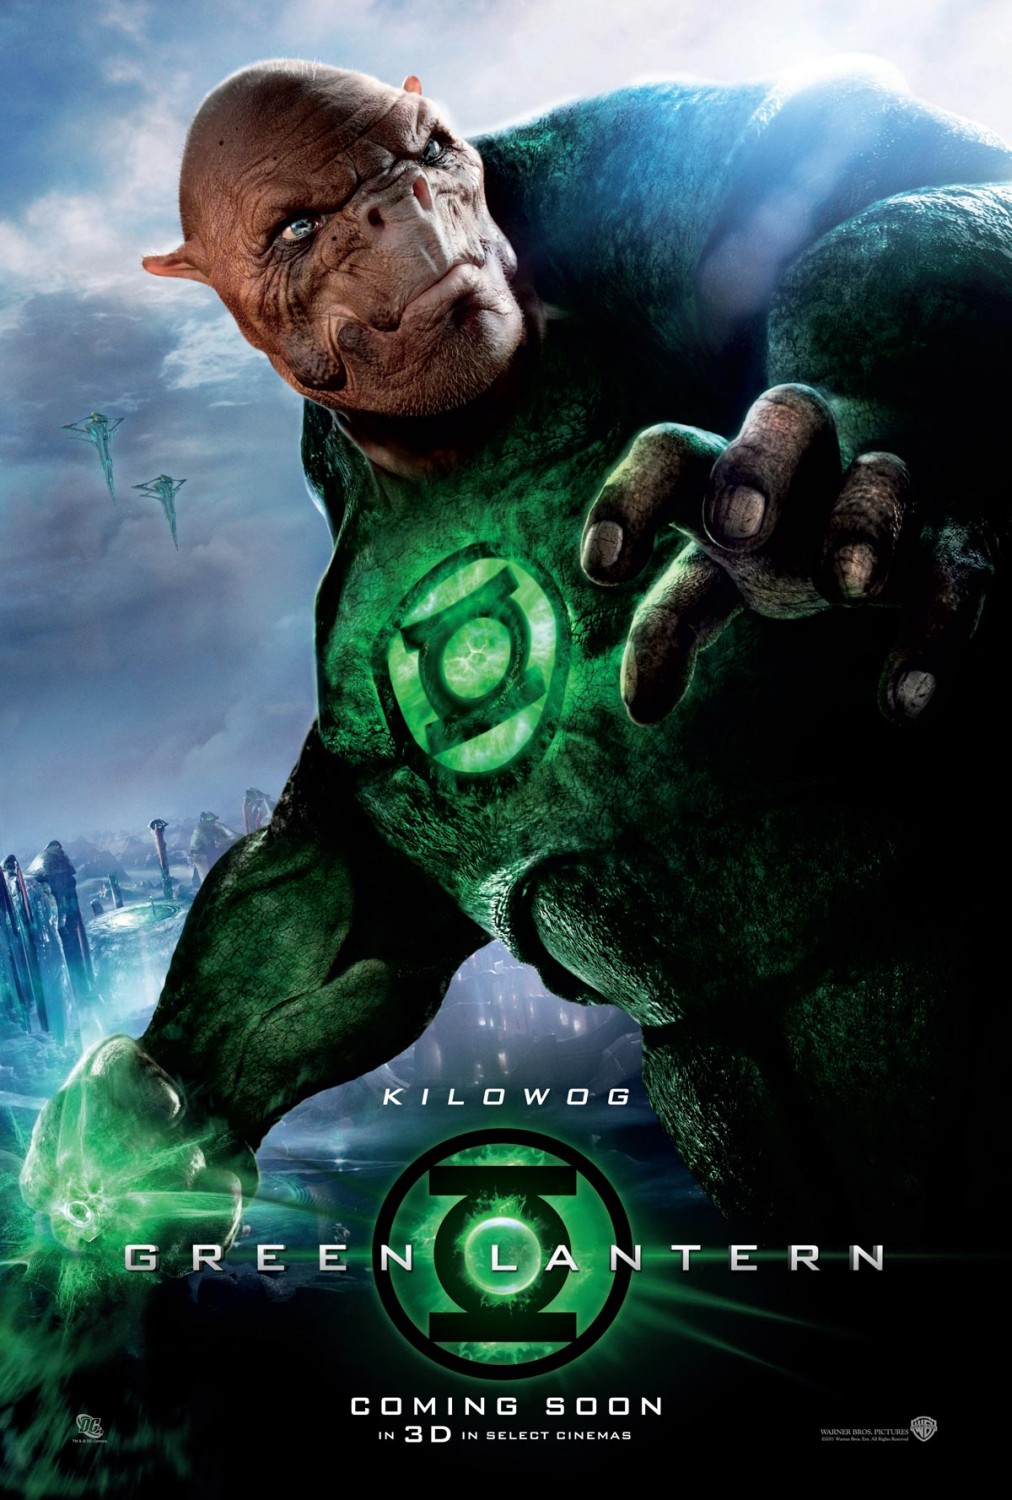 Extra Large Movie Poster Image for Green Lantern (#11 of 20)